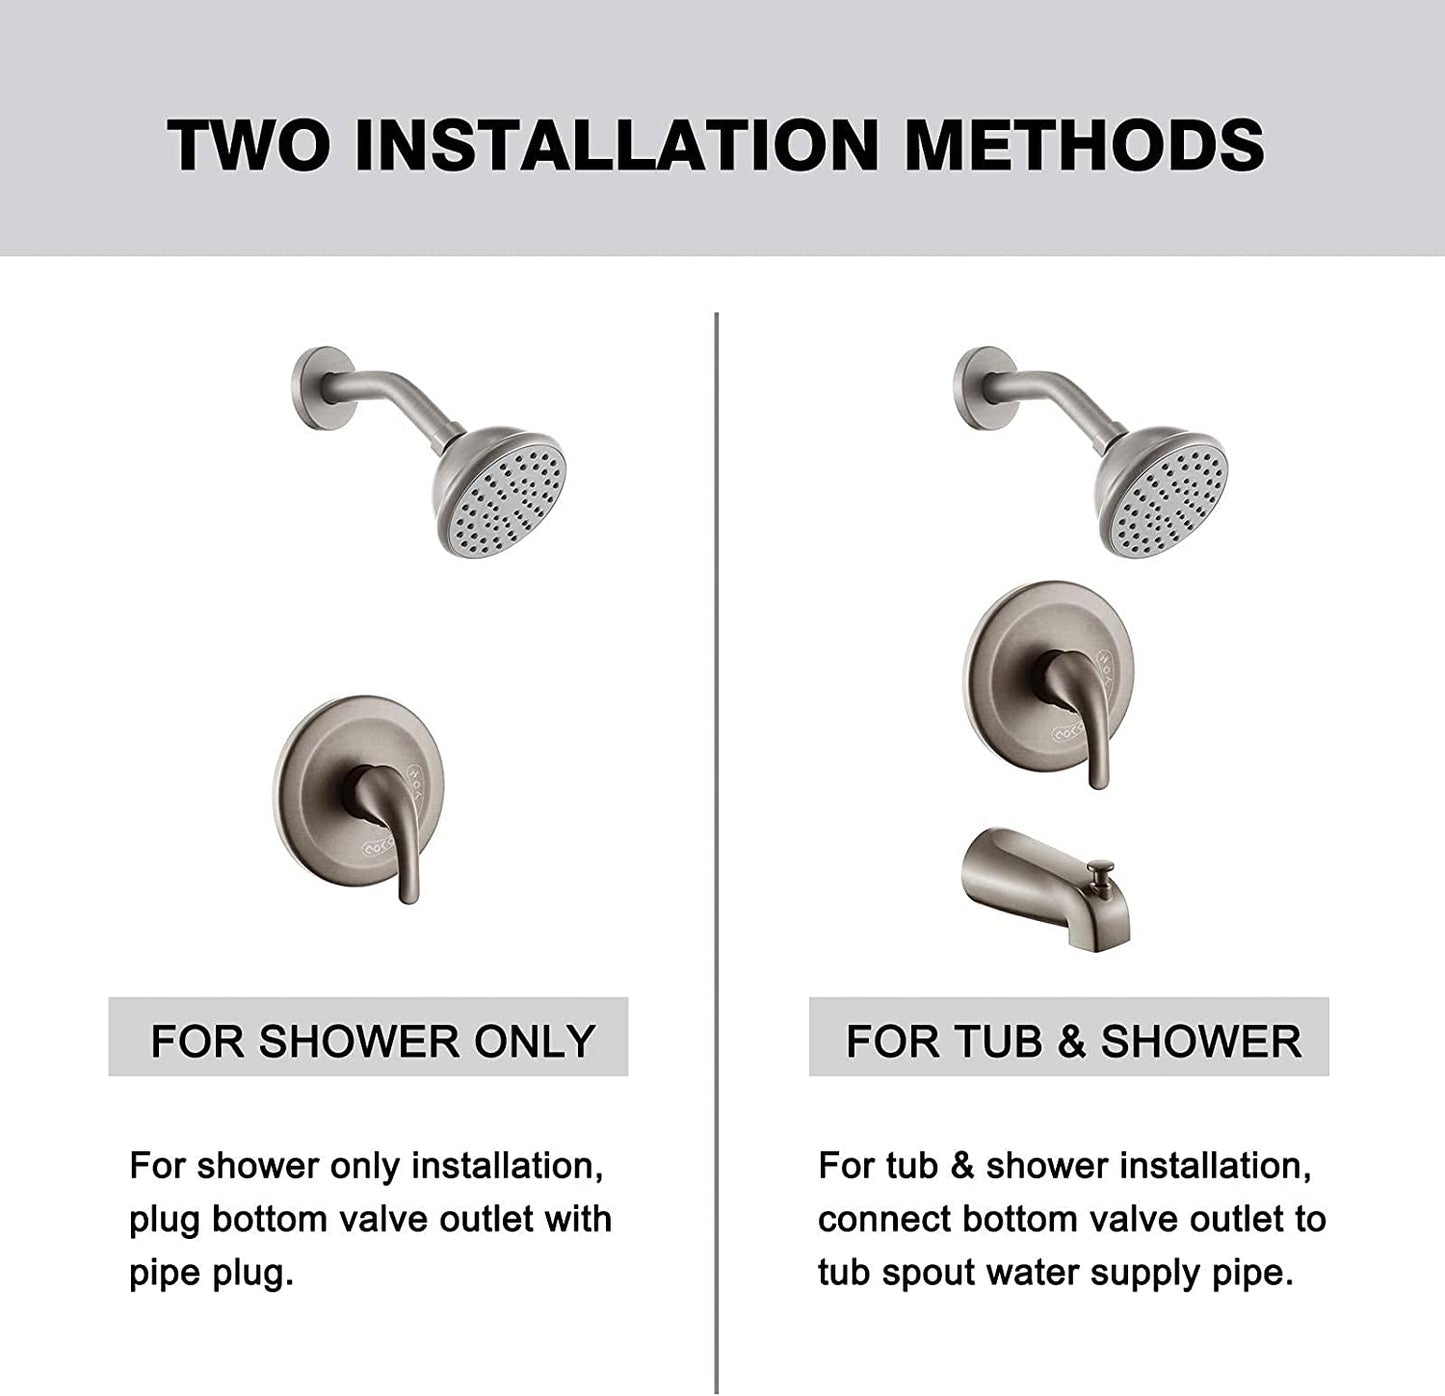 Brushed Nickel 4 Inch Shower Faucet wih Tub Spout Combo (Valve Included) ｜ALWEN